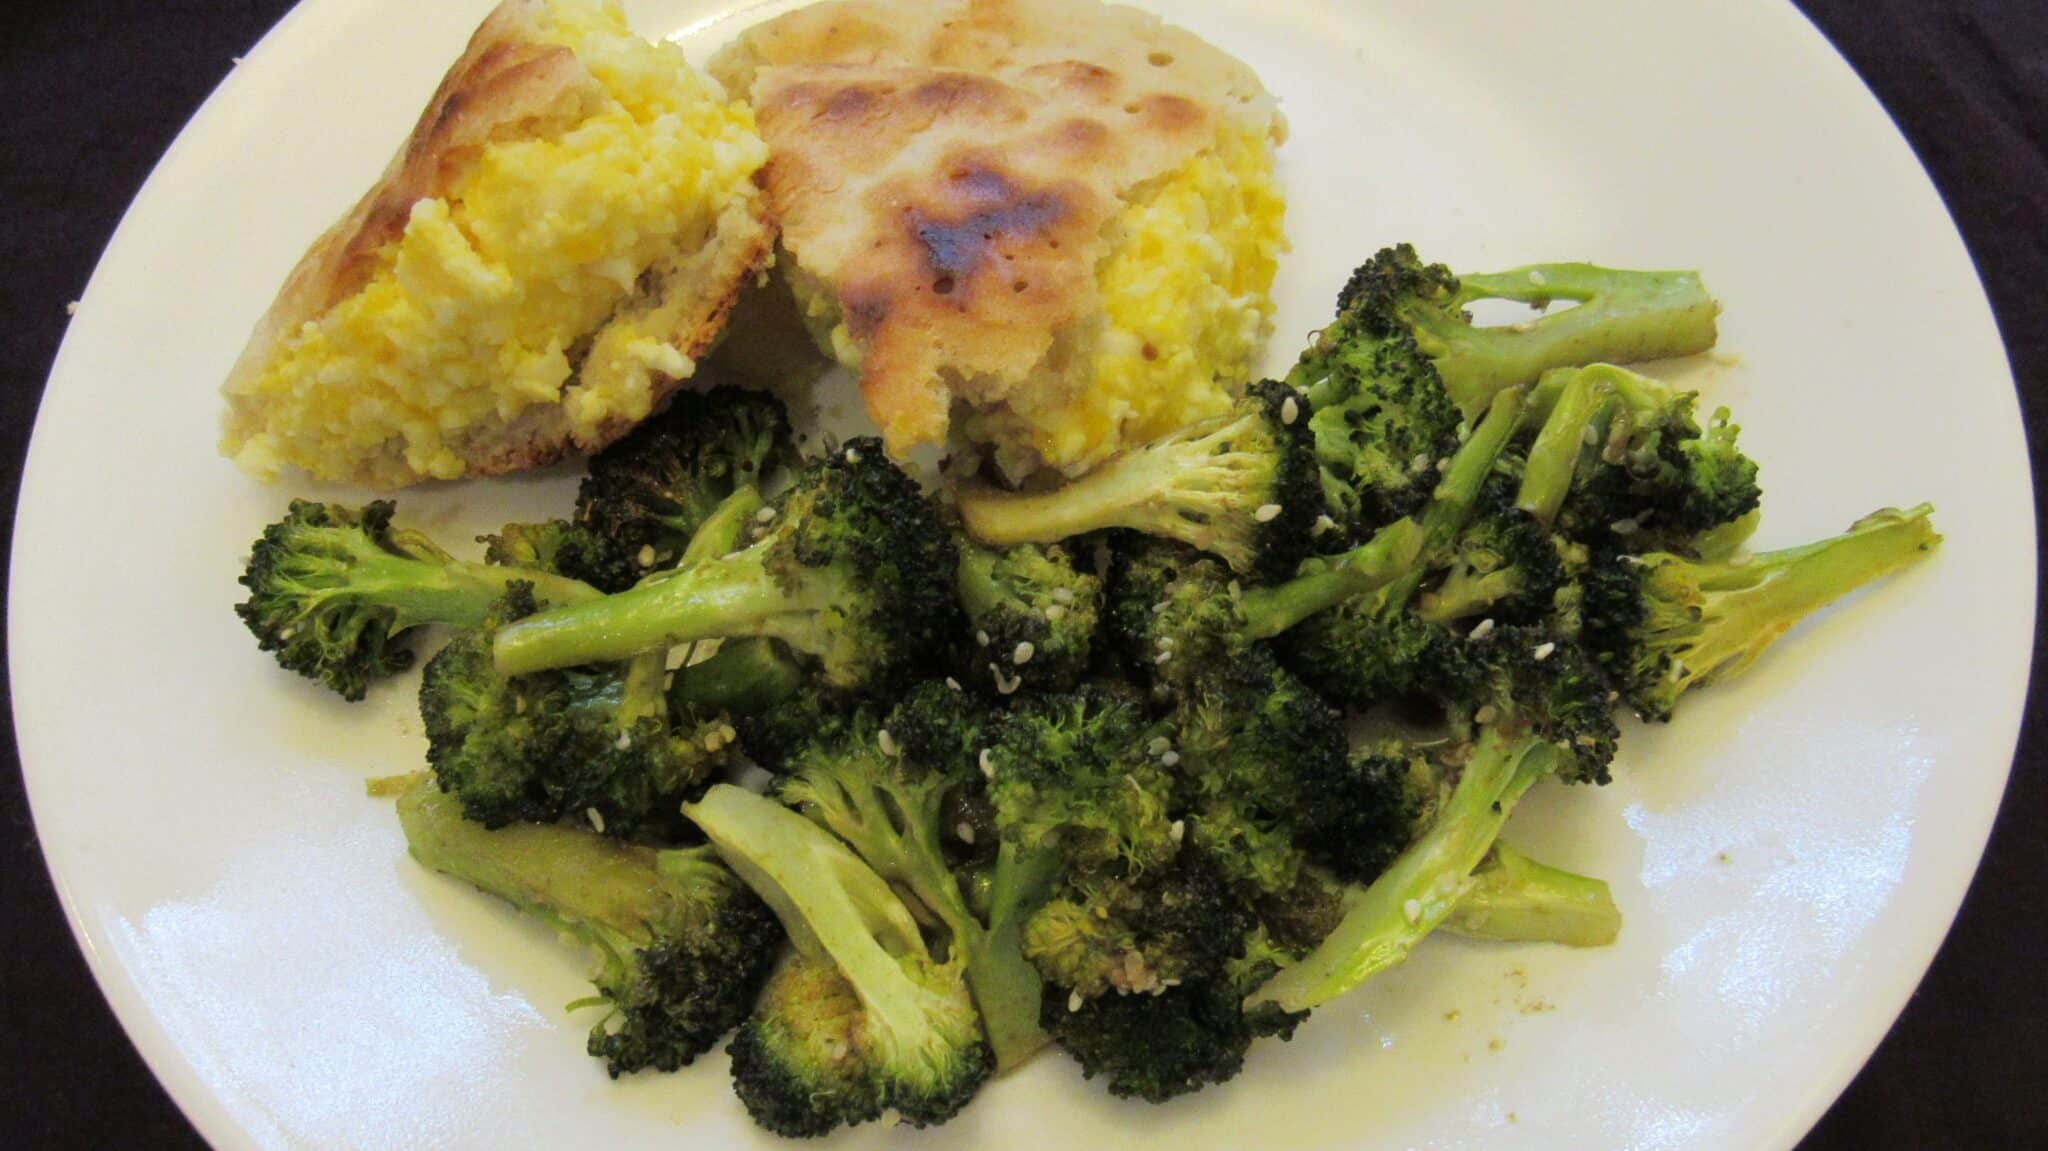 Roasted broccoli is served with an egg sandwich on a white plate for breakfast.